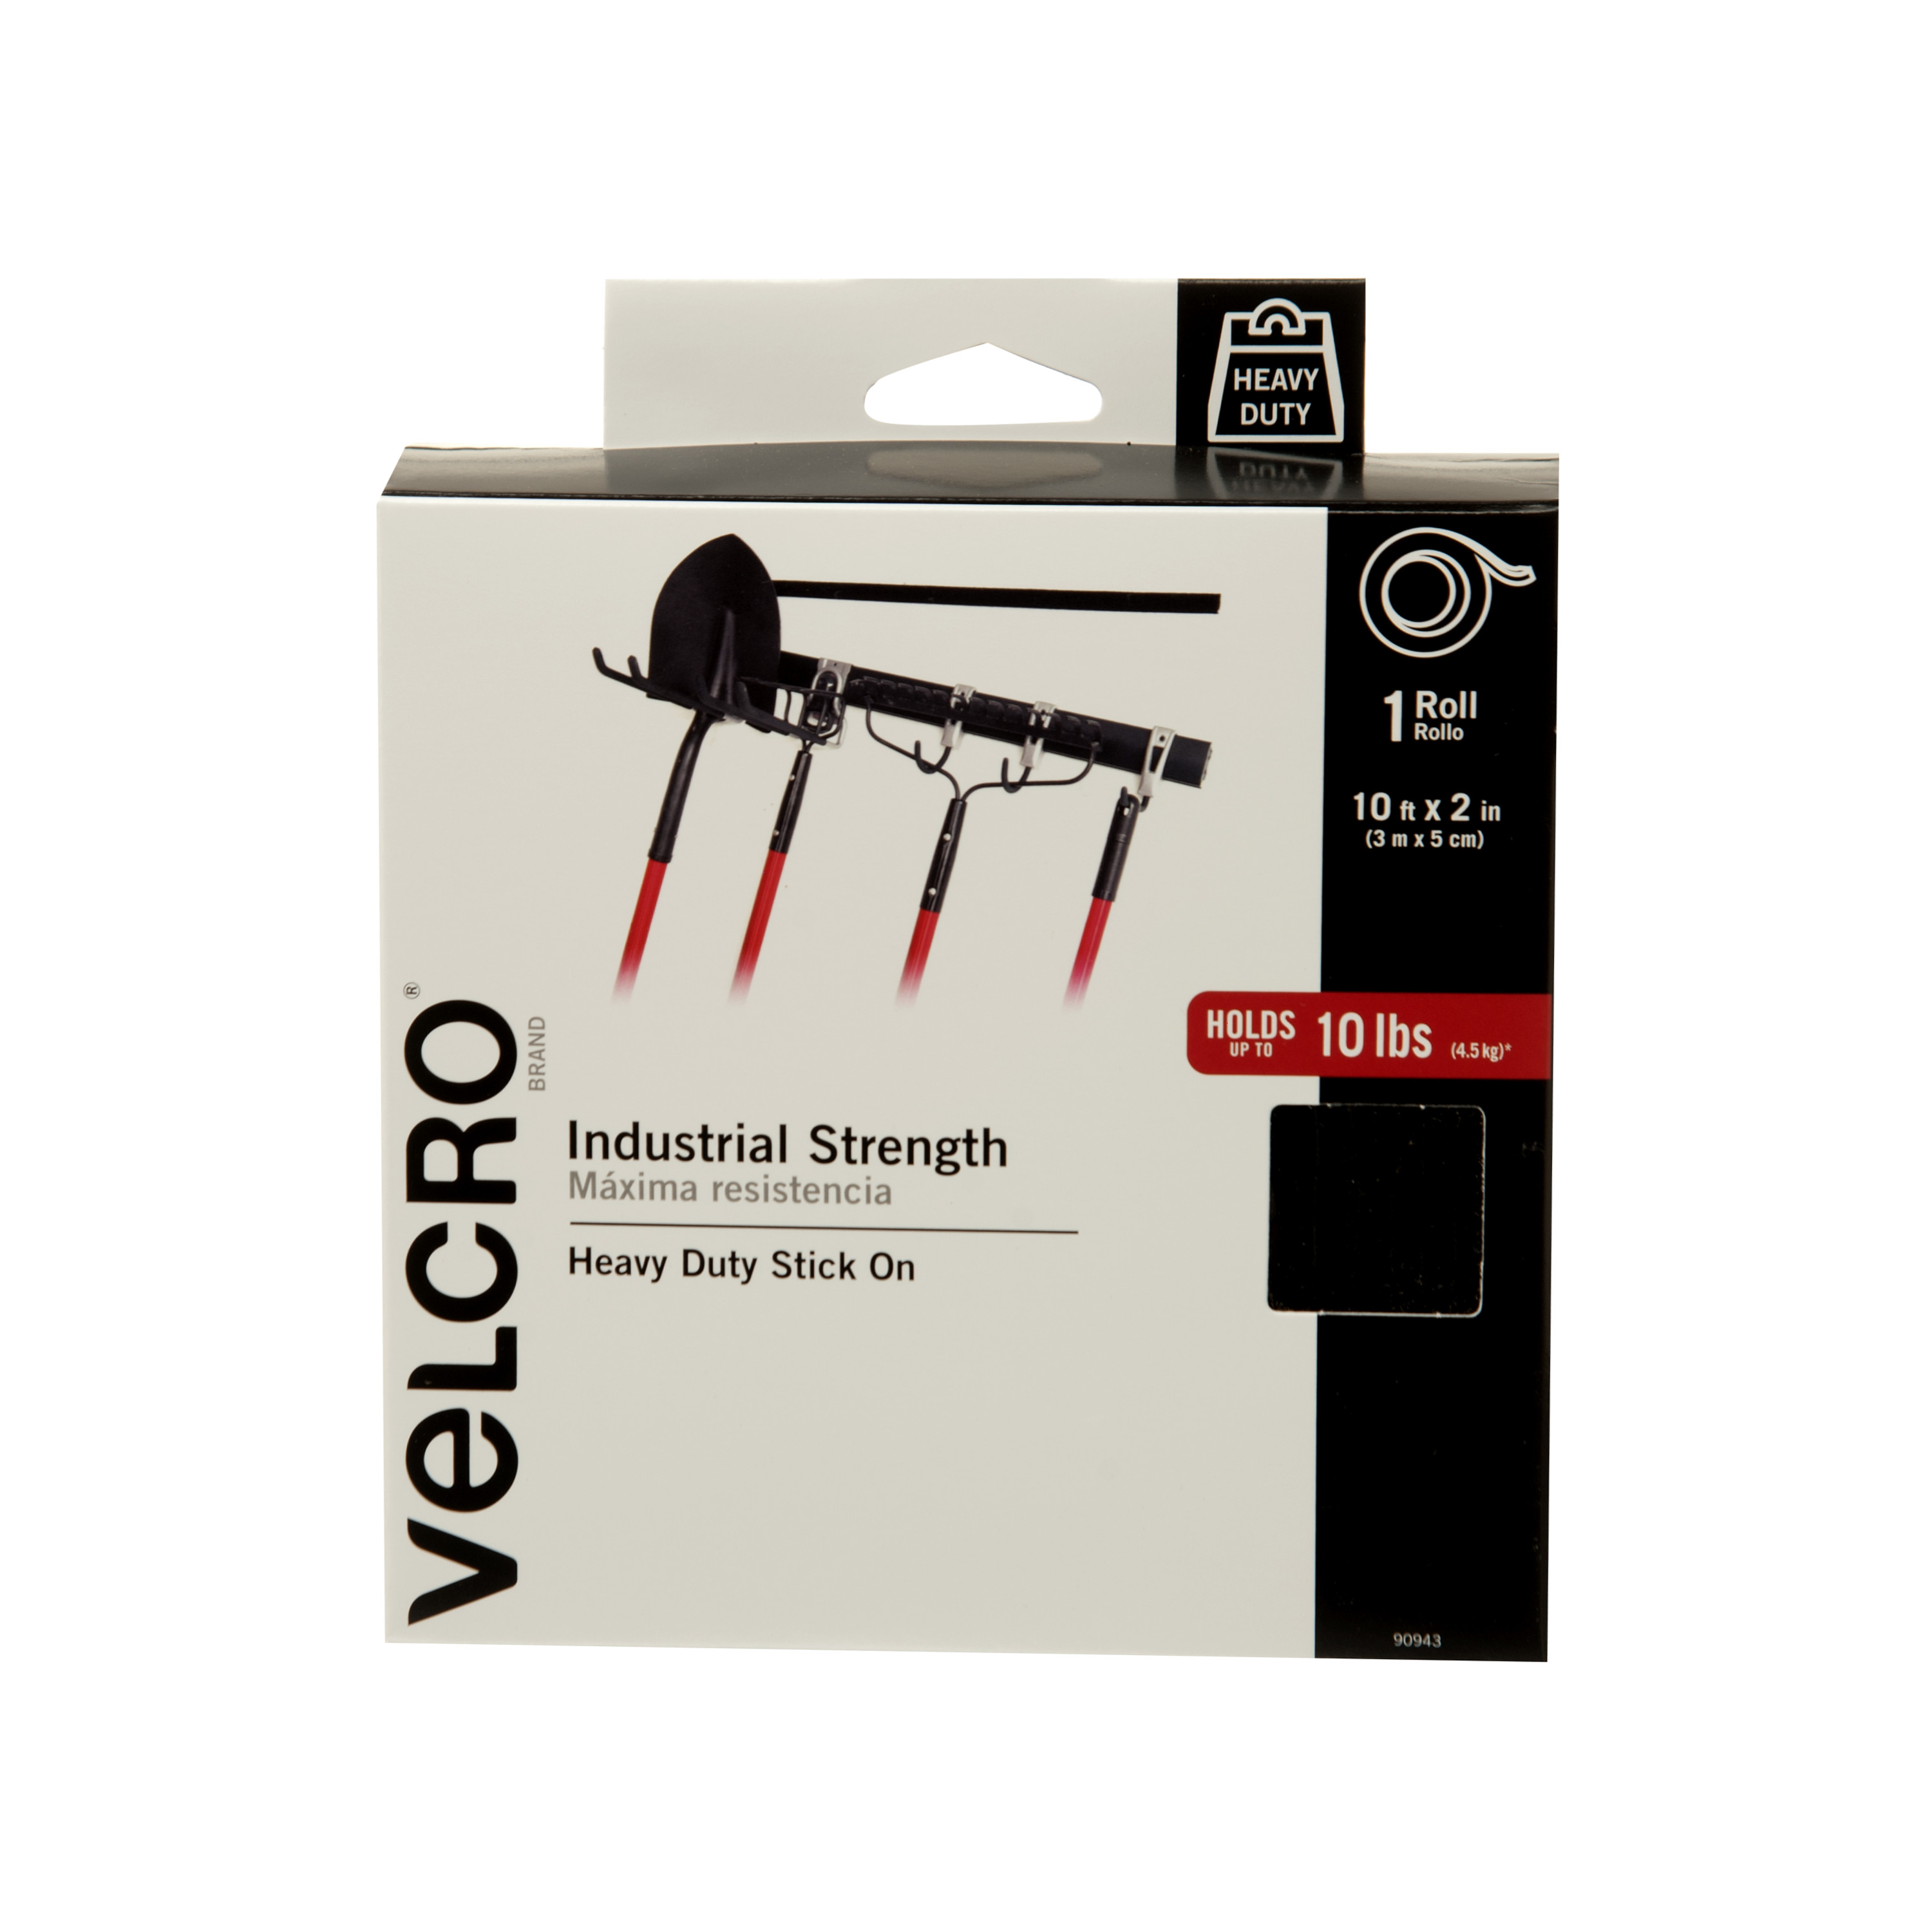 VELCRO Brand Industrial Strength, Indoor & Outdoor Use, Superior Holding Power on Smooth Surfaces 10ft x 2in Roll, Black - image 1 of 7